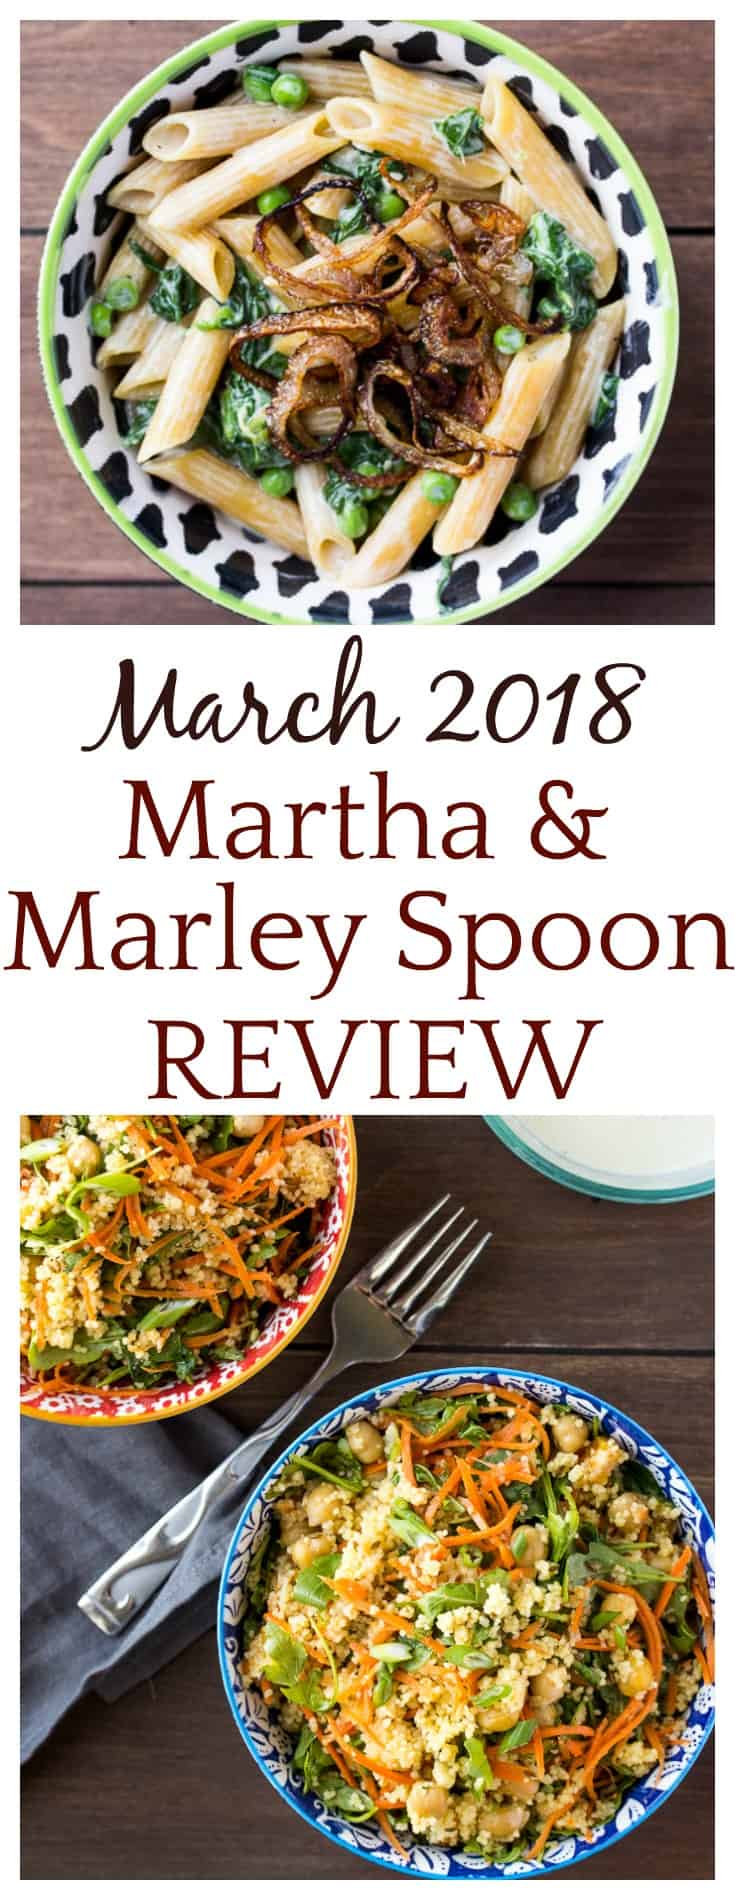 This March 2018 Martha & Marley Spoon Review features 3 delicious vegetarian meals! Once again, I was very impressed with the quality and the flavors of the recipes! | meal kit review | #marthamarleyspoon #marleyspoonreview #mealkit #mealkits #mealkitreview 